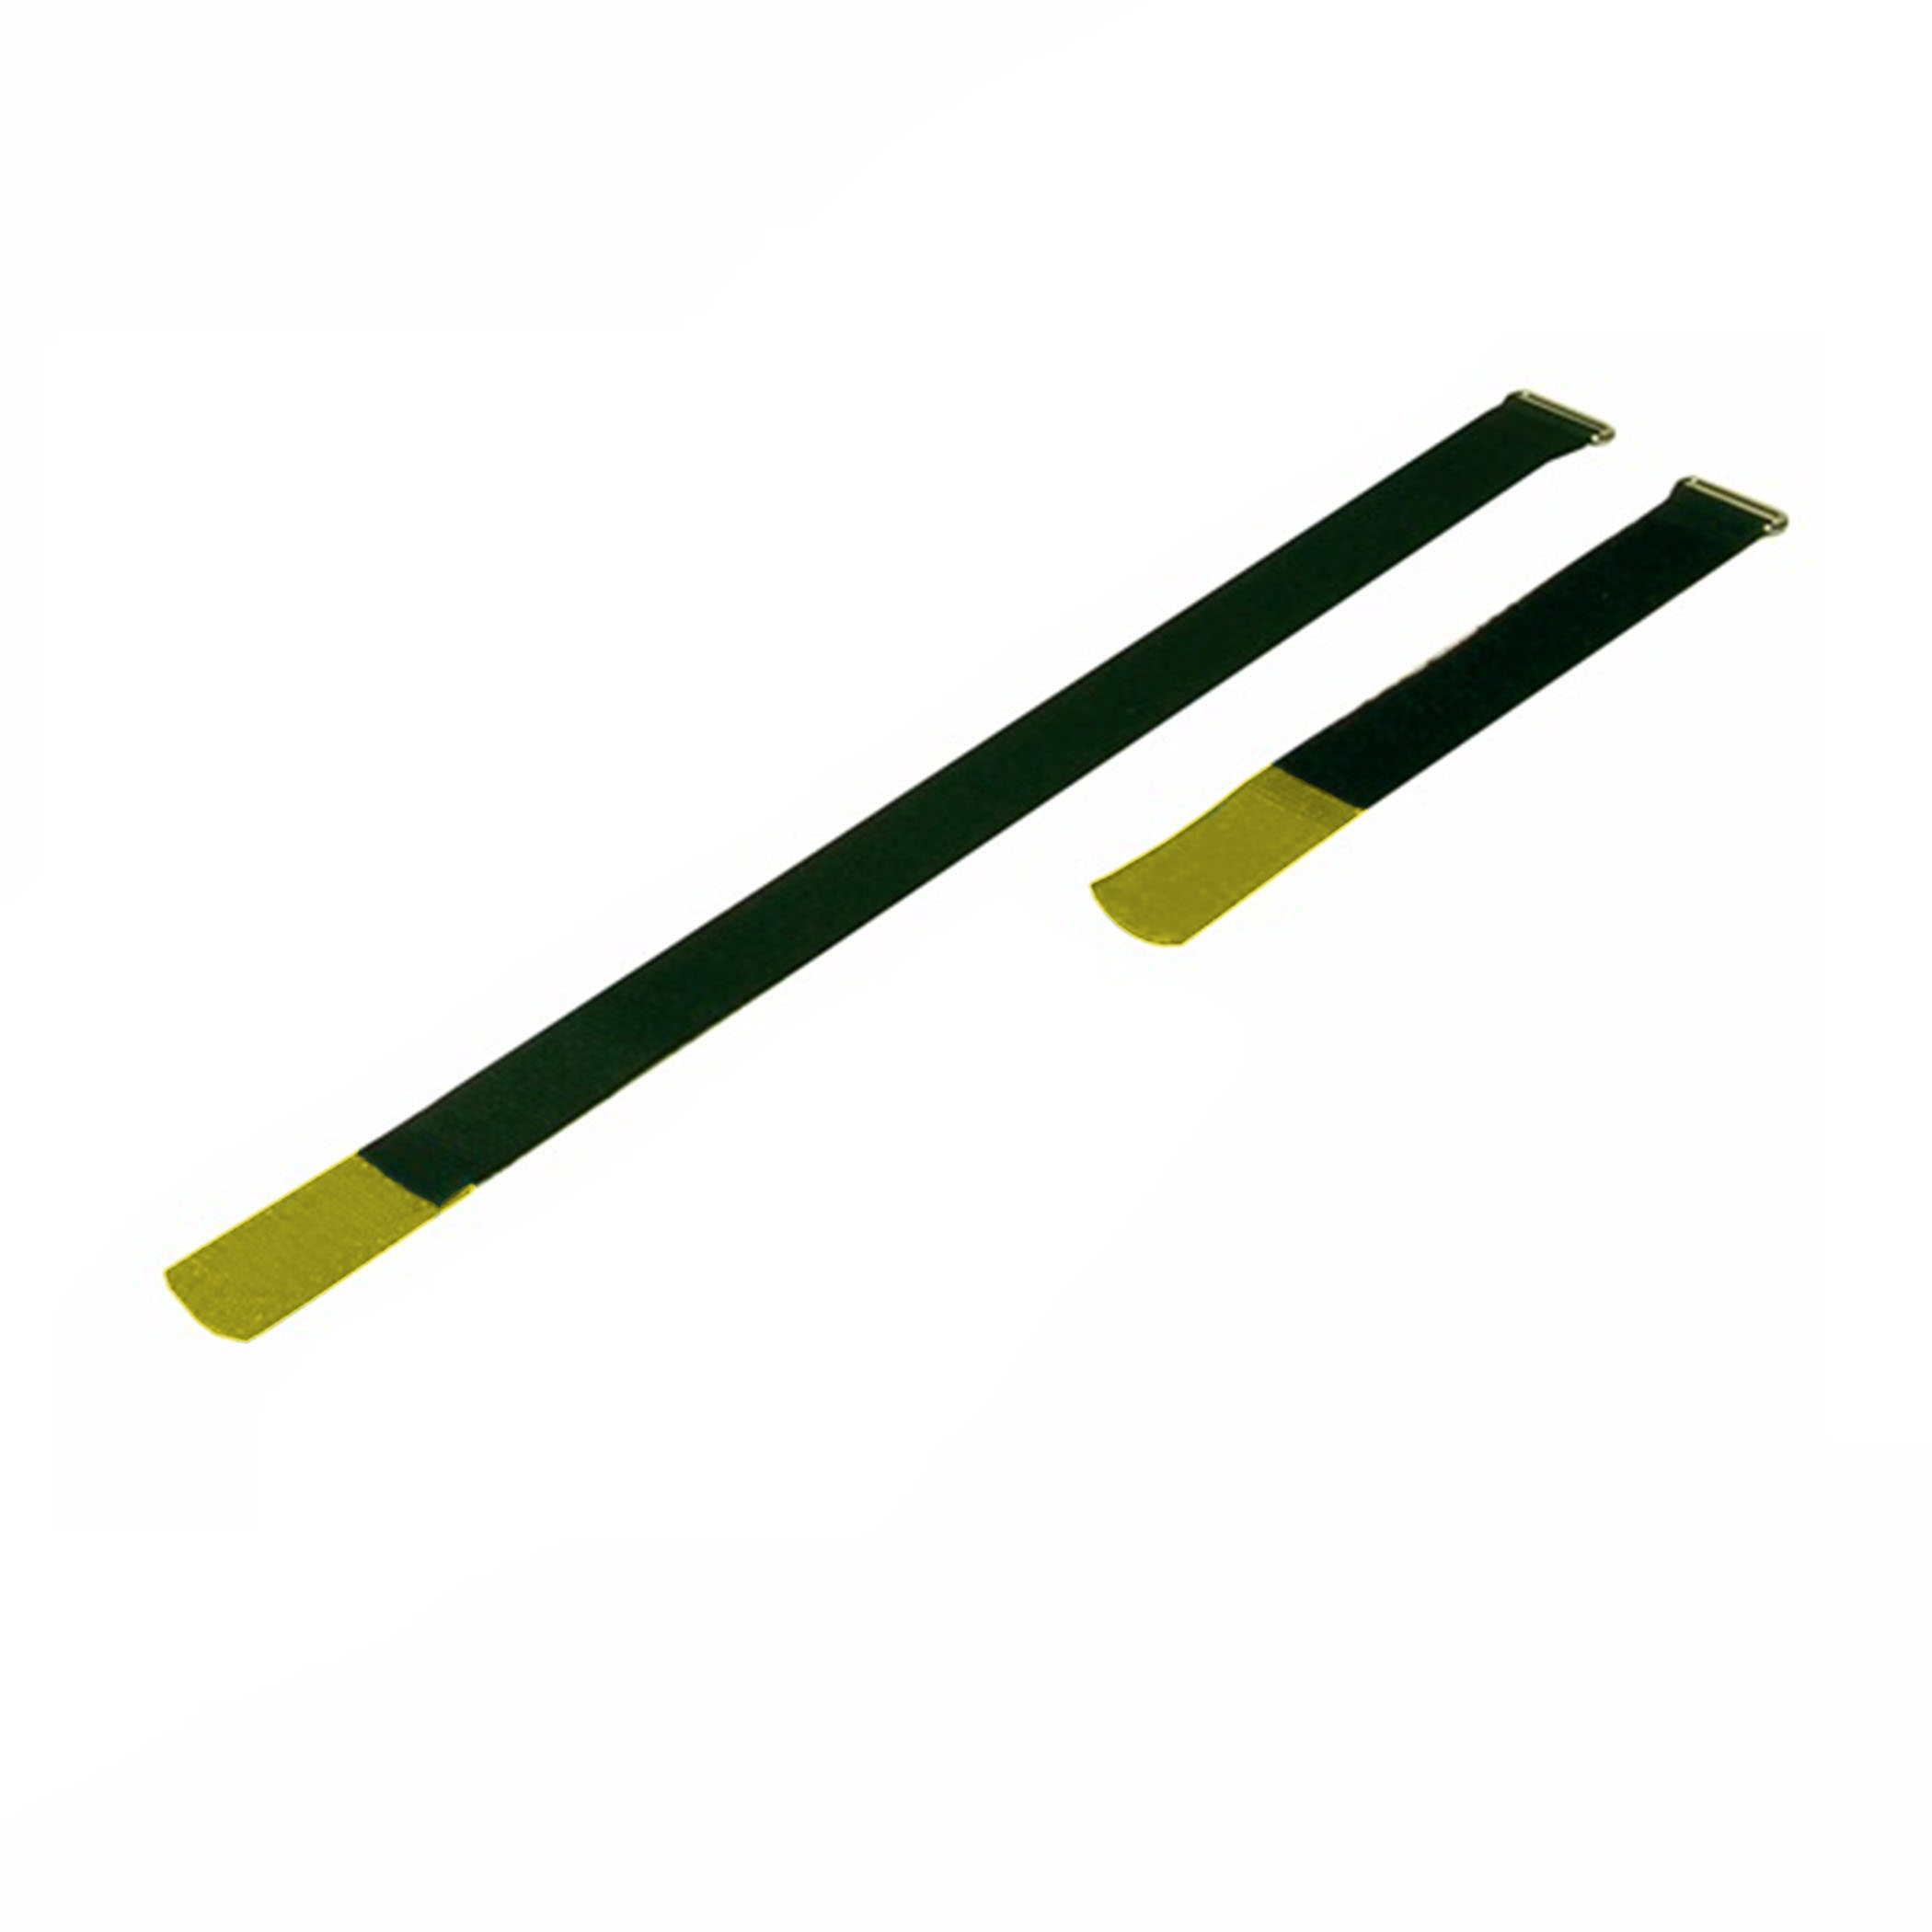 Cable Tie 220x25mm with Hook Yellow, (10 pieces) - a2522-700h